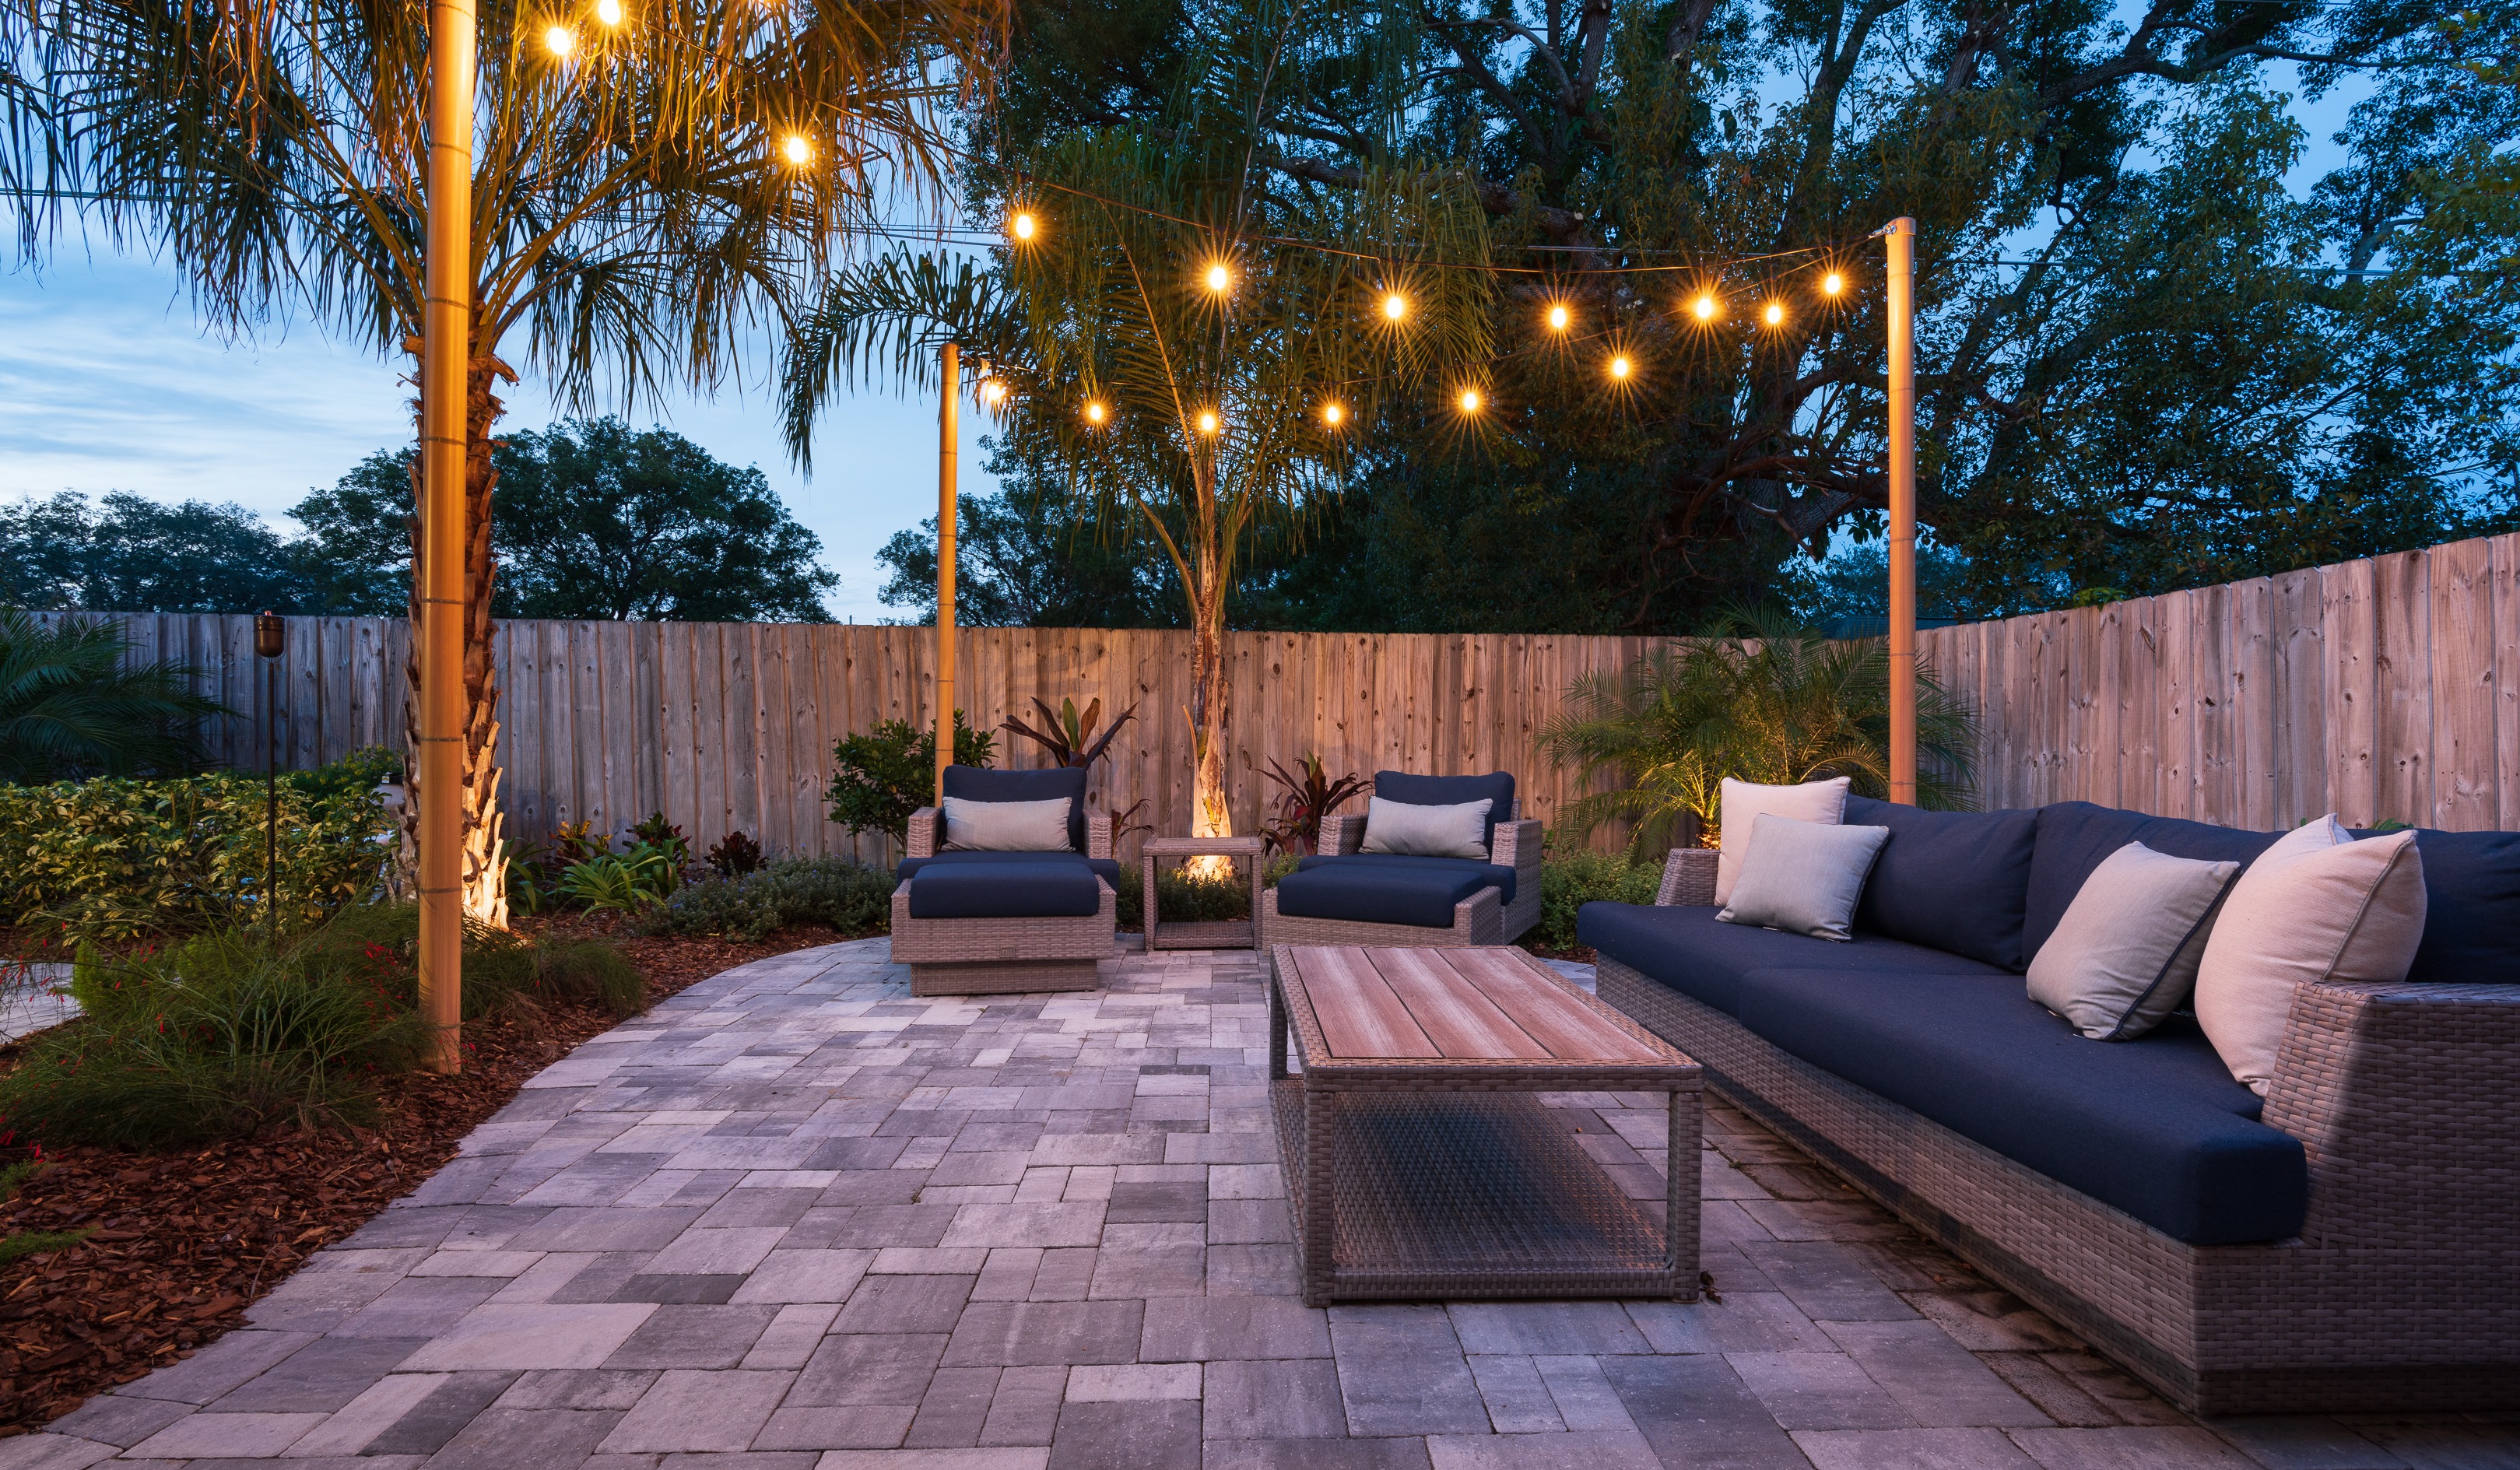 string lights and landscape lighting on trees around patio